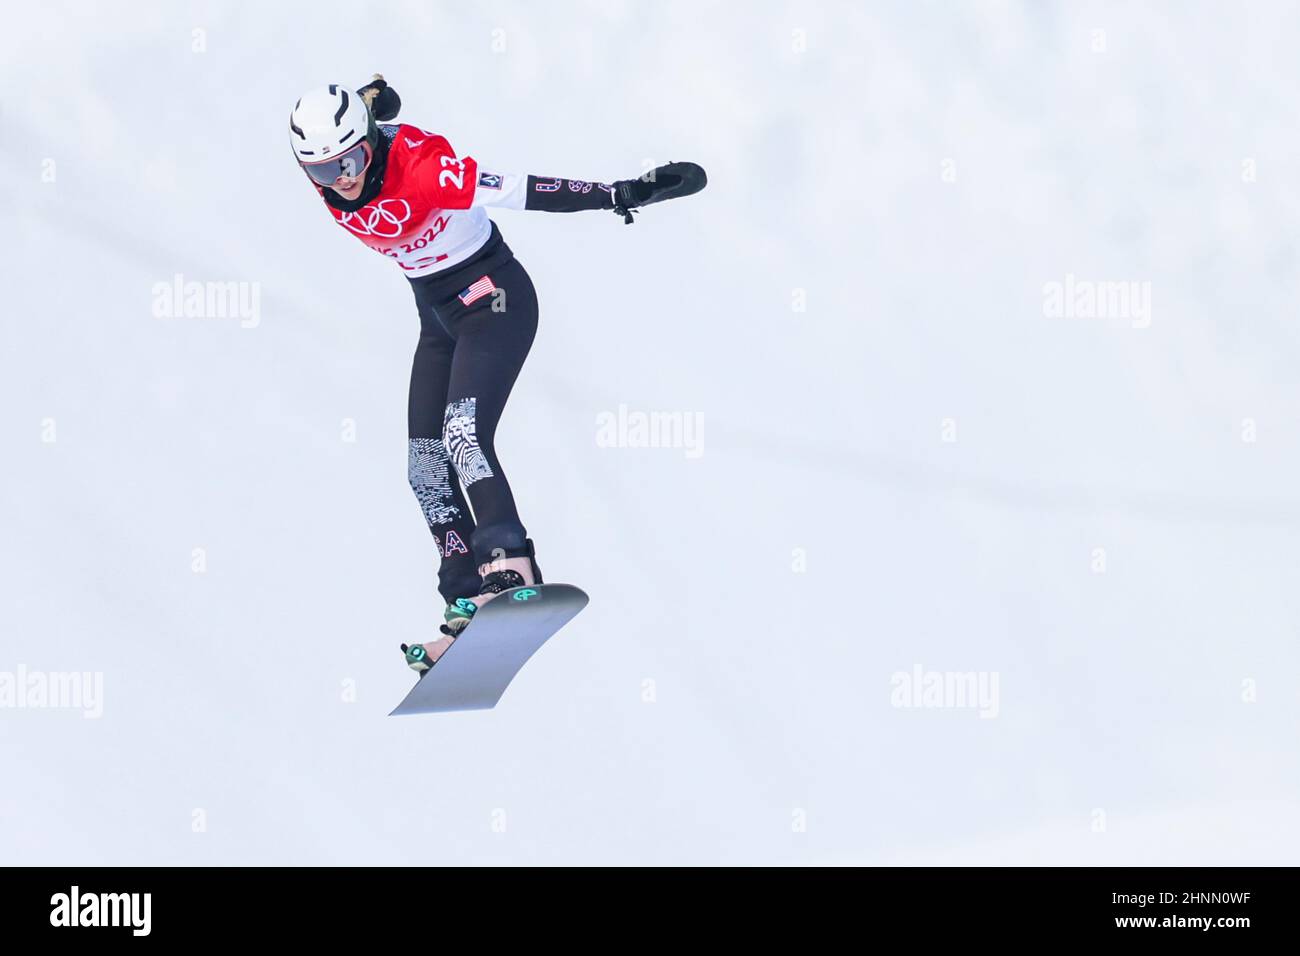 Meghan Tierney (USA), FEBRUARY 9, 2022 - Snowboarding : Women's Snowboard  Cross Qualification during the Beijing 2022 Olympic Winter Games at Genti  Stock Photo - Alamy